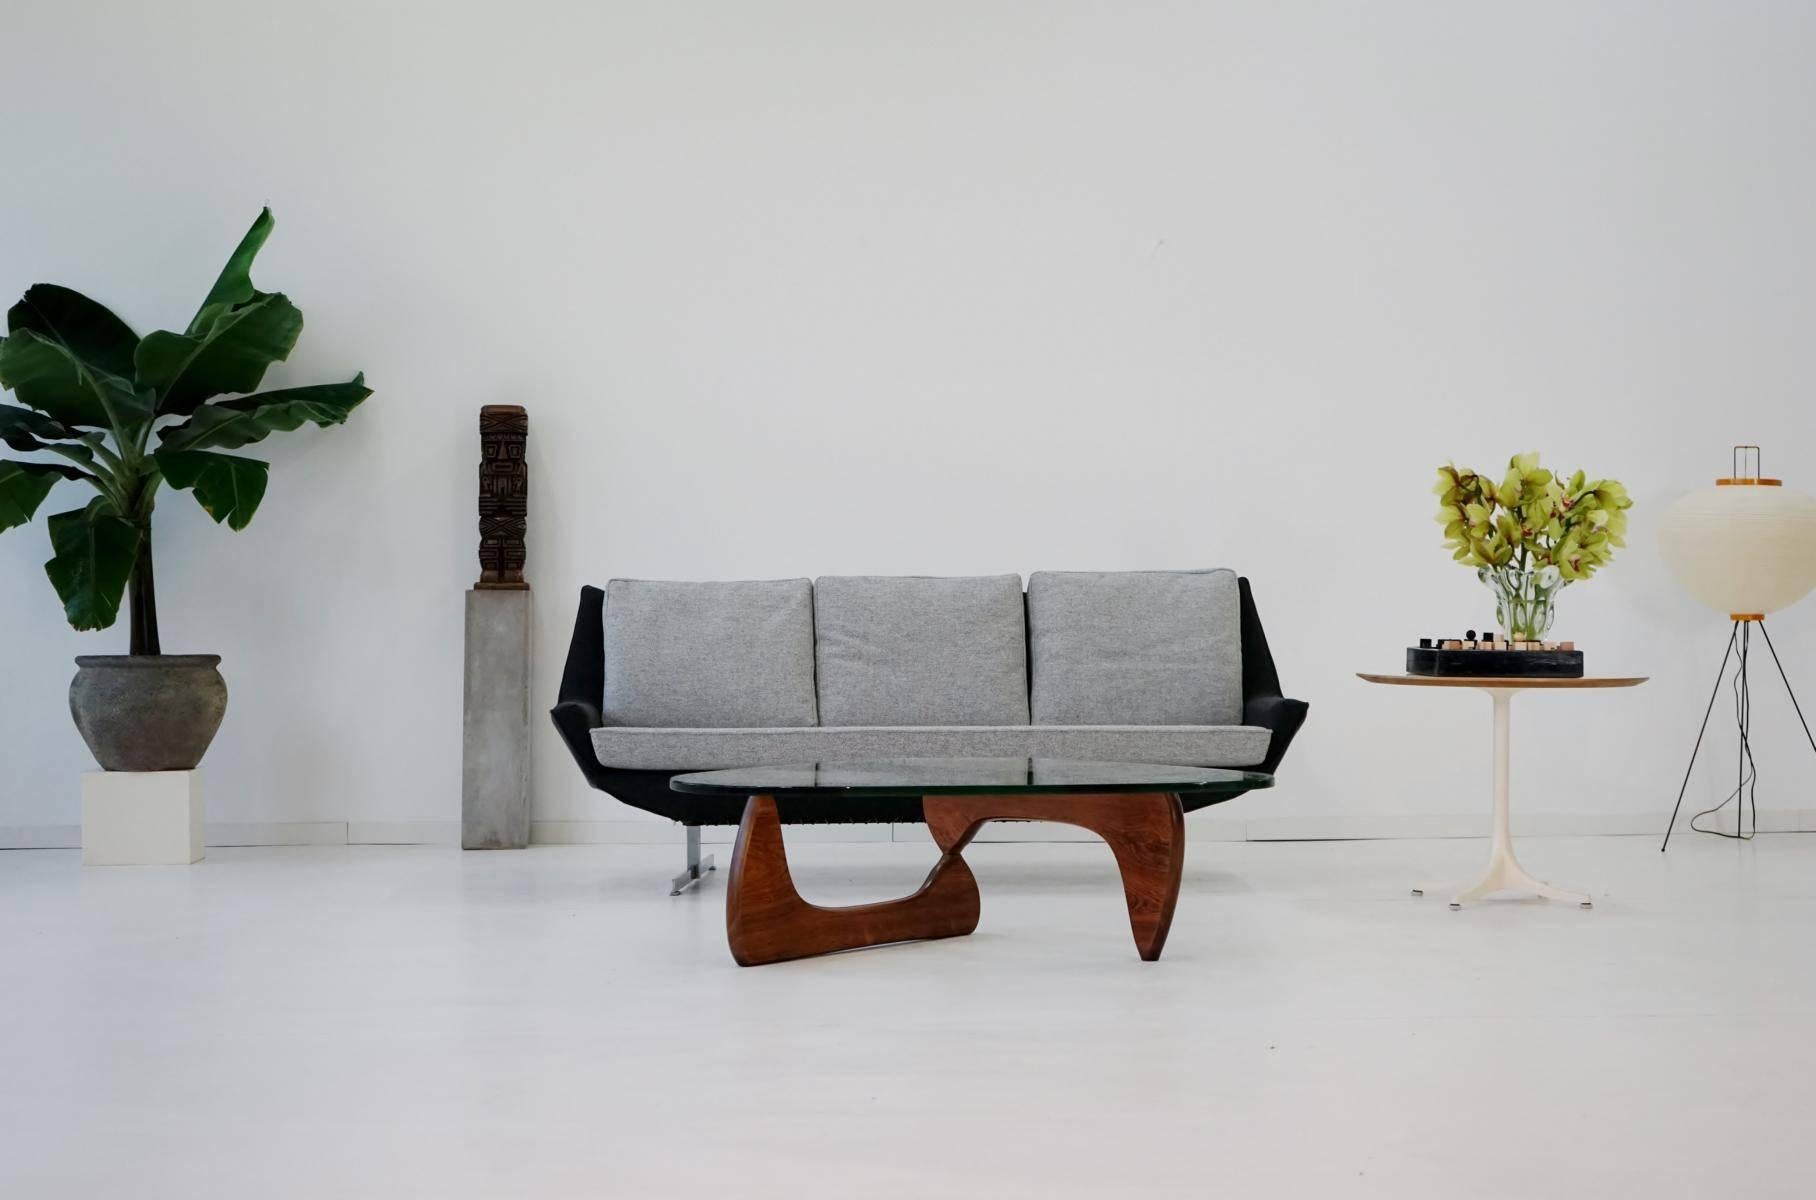 1950s Three-Seat Sofa by Knoll Midcentury Hallingdal Canapé Couch (Metall)